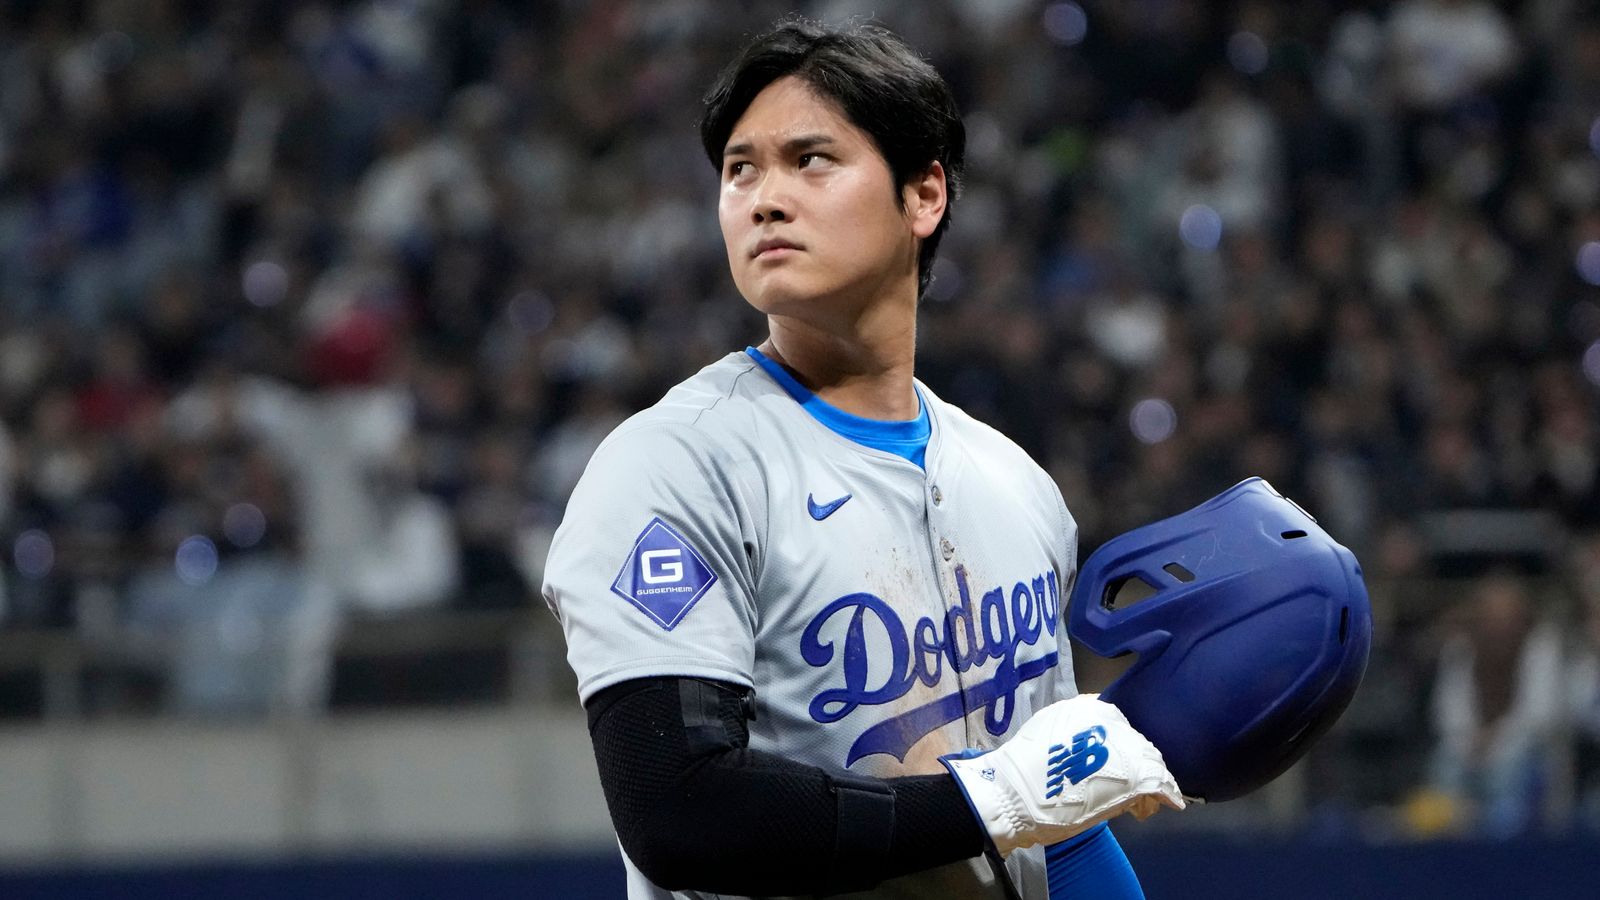 Shohei Ohtani's interpreter fired after 'massive theft' allegations